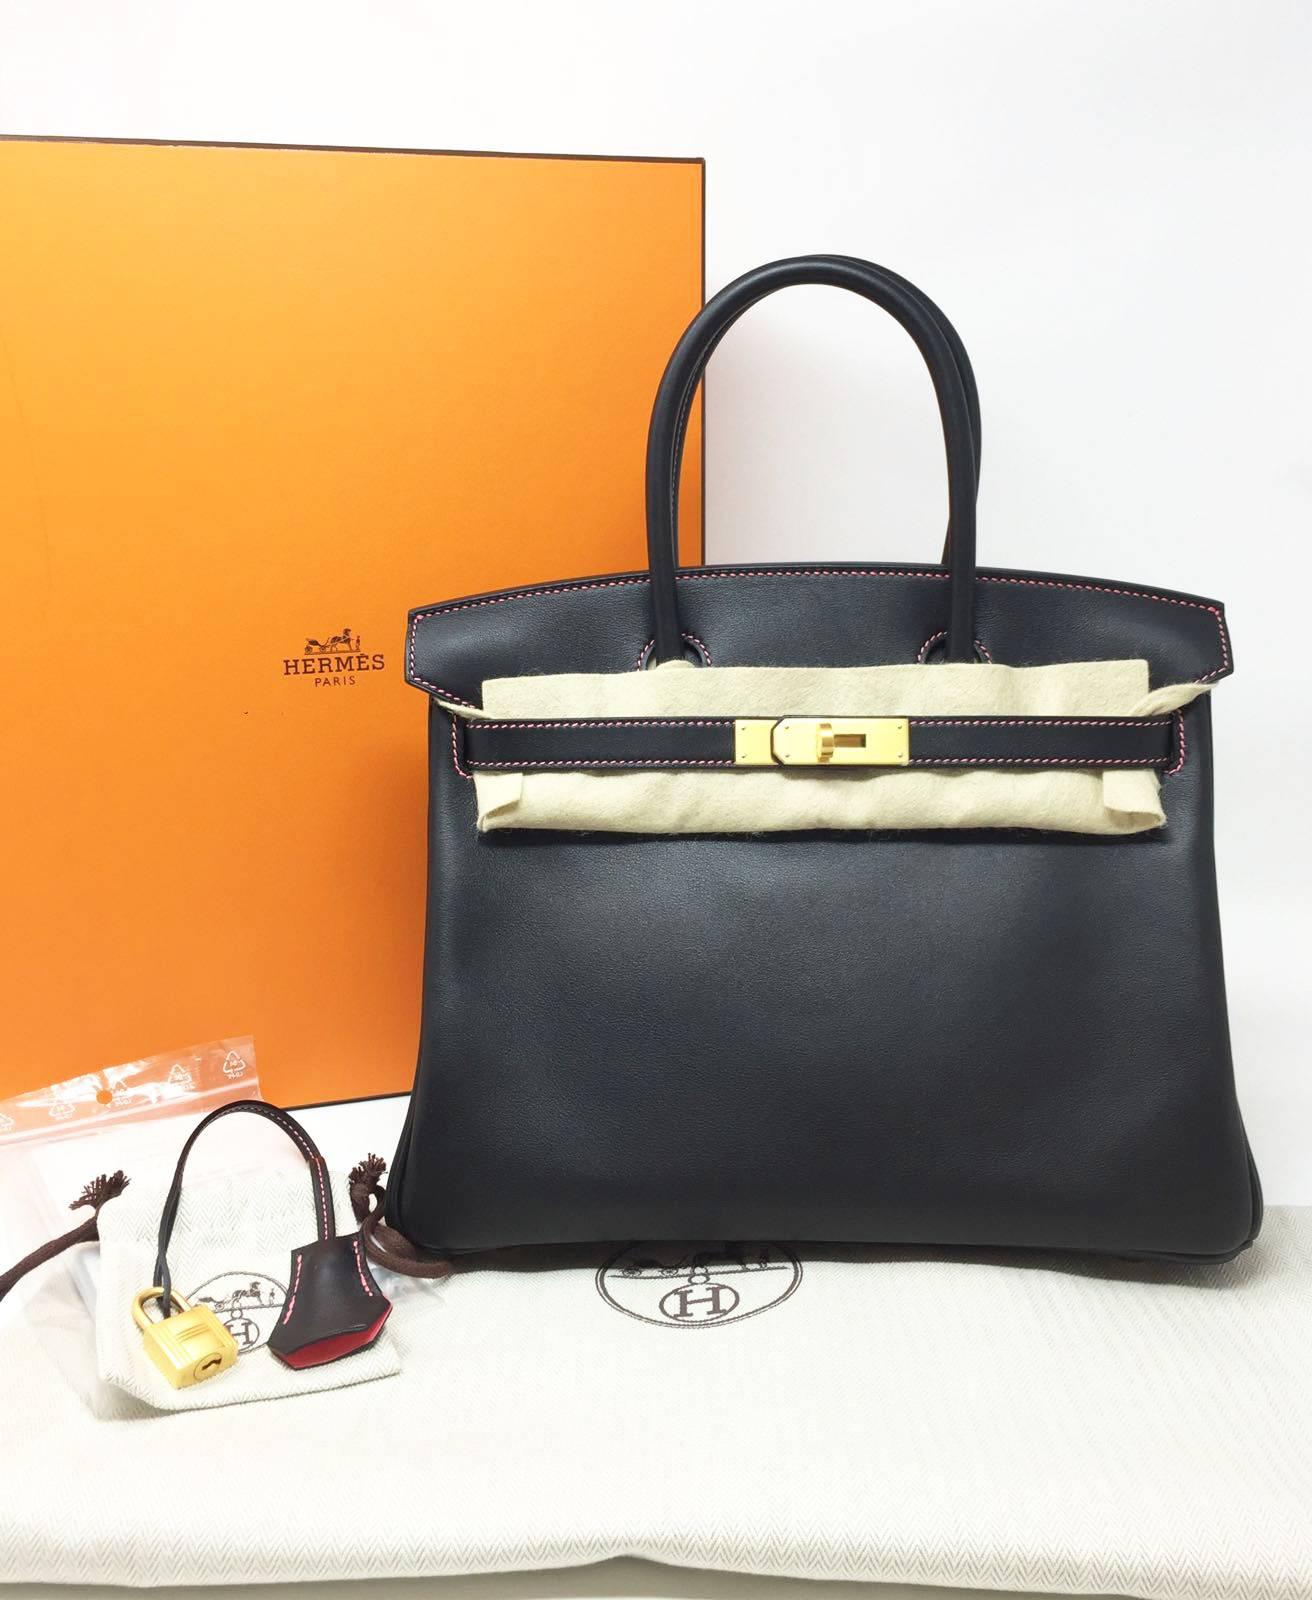 Hermes Paris Sac Birkin 30 Veau Swift Black, inside chevre rose azalee color. 
 Special Order Exclusive horseshoe stamp. Hdw Gold. Never used. Brand new canned, year 2018. Original Envoice. 
Pristine conditions (with plastic on the hardware) Perfect